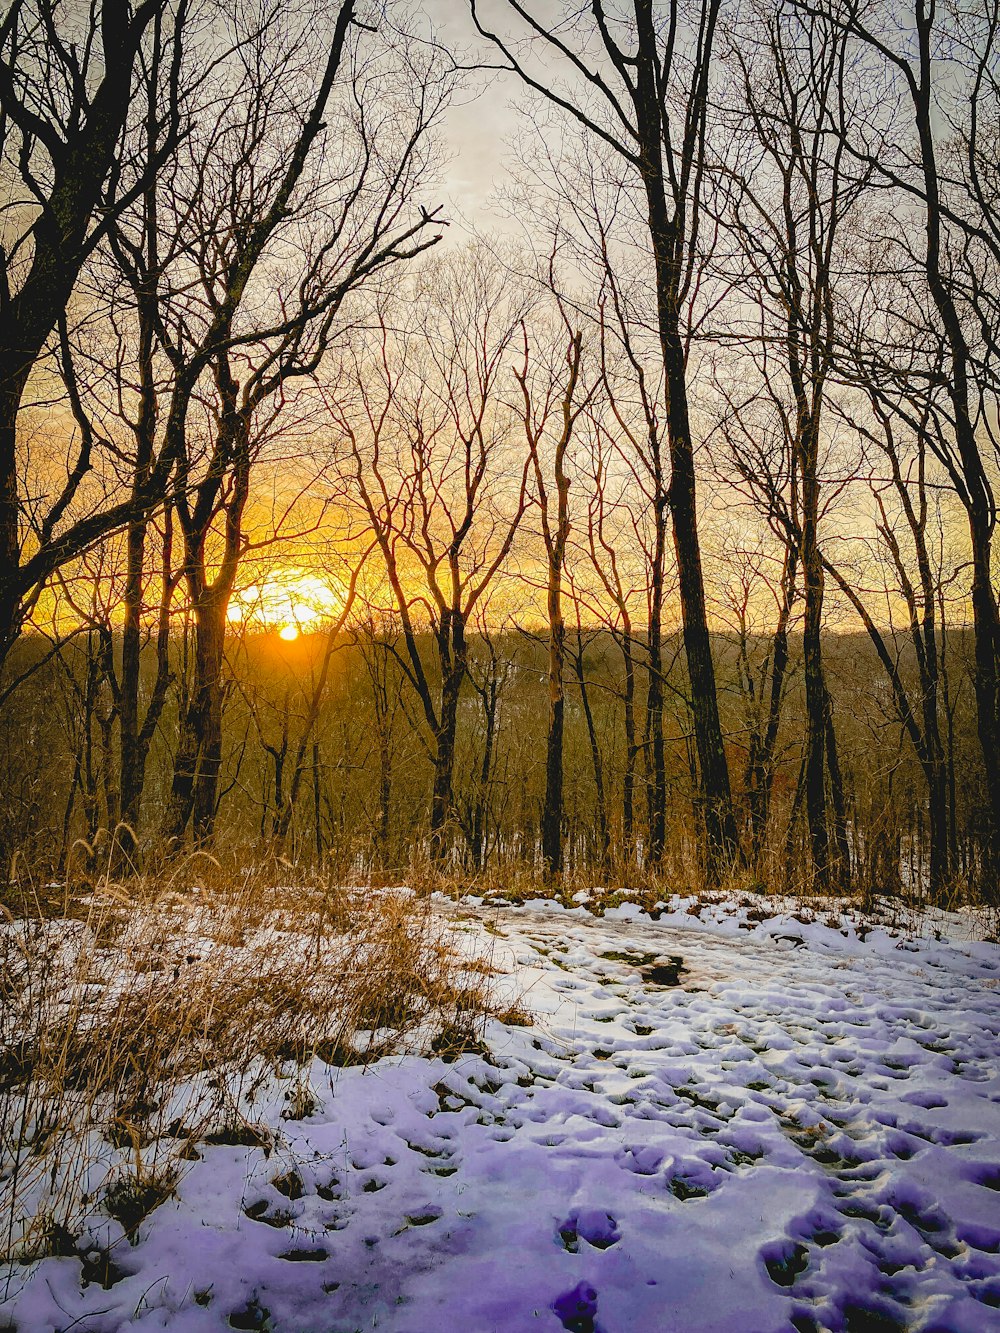 snow covered field with trees during sunset